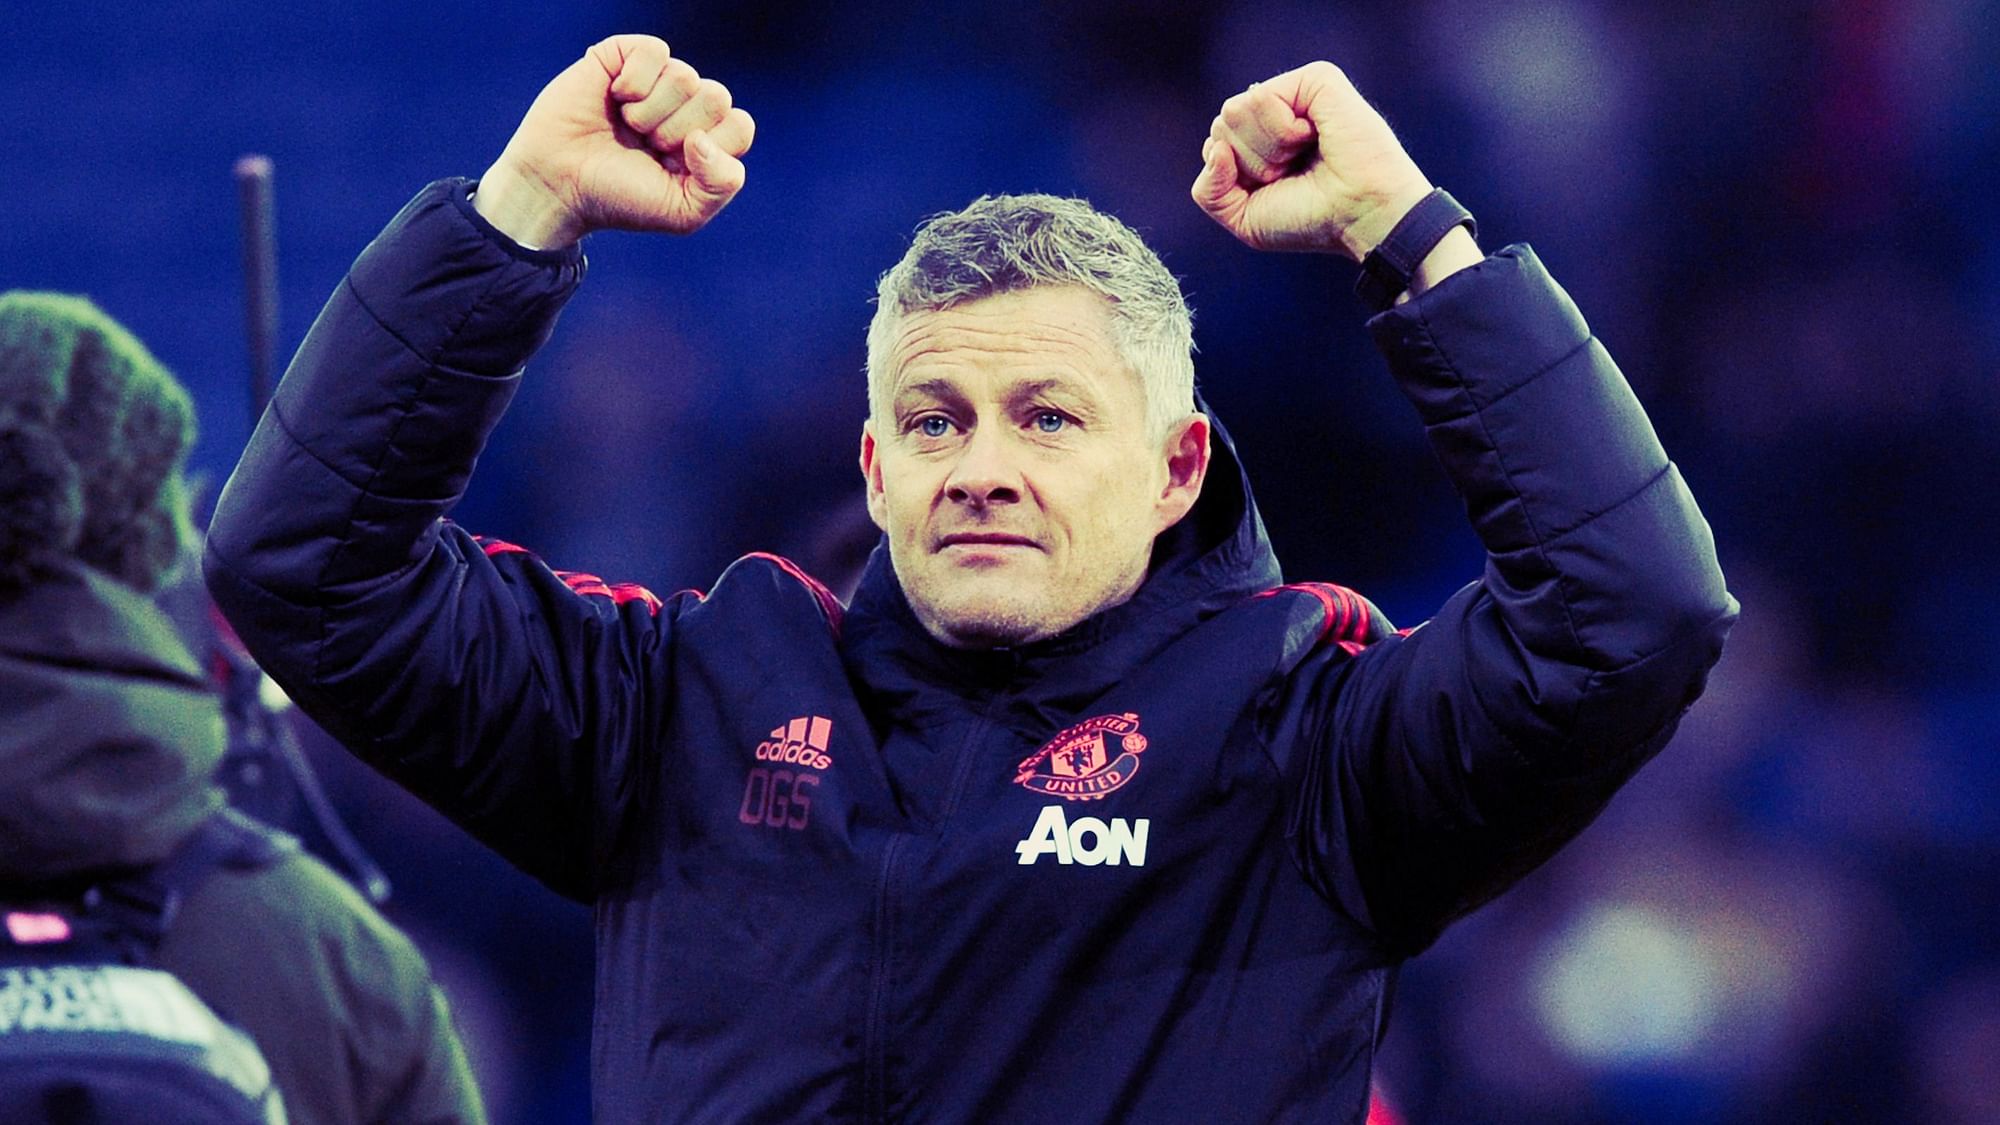 Manchester United on Thursday, 28 March, confirmed that Ole Gunnar Solskjaer has been appointed as the club’s manager.